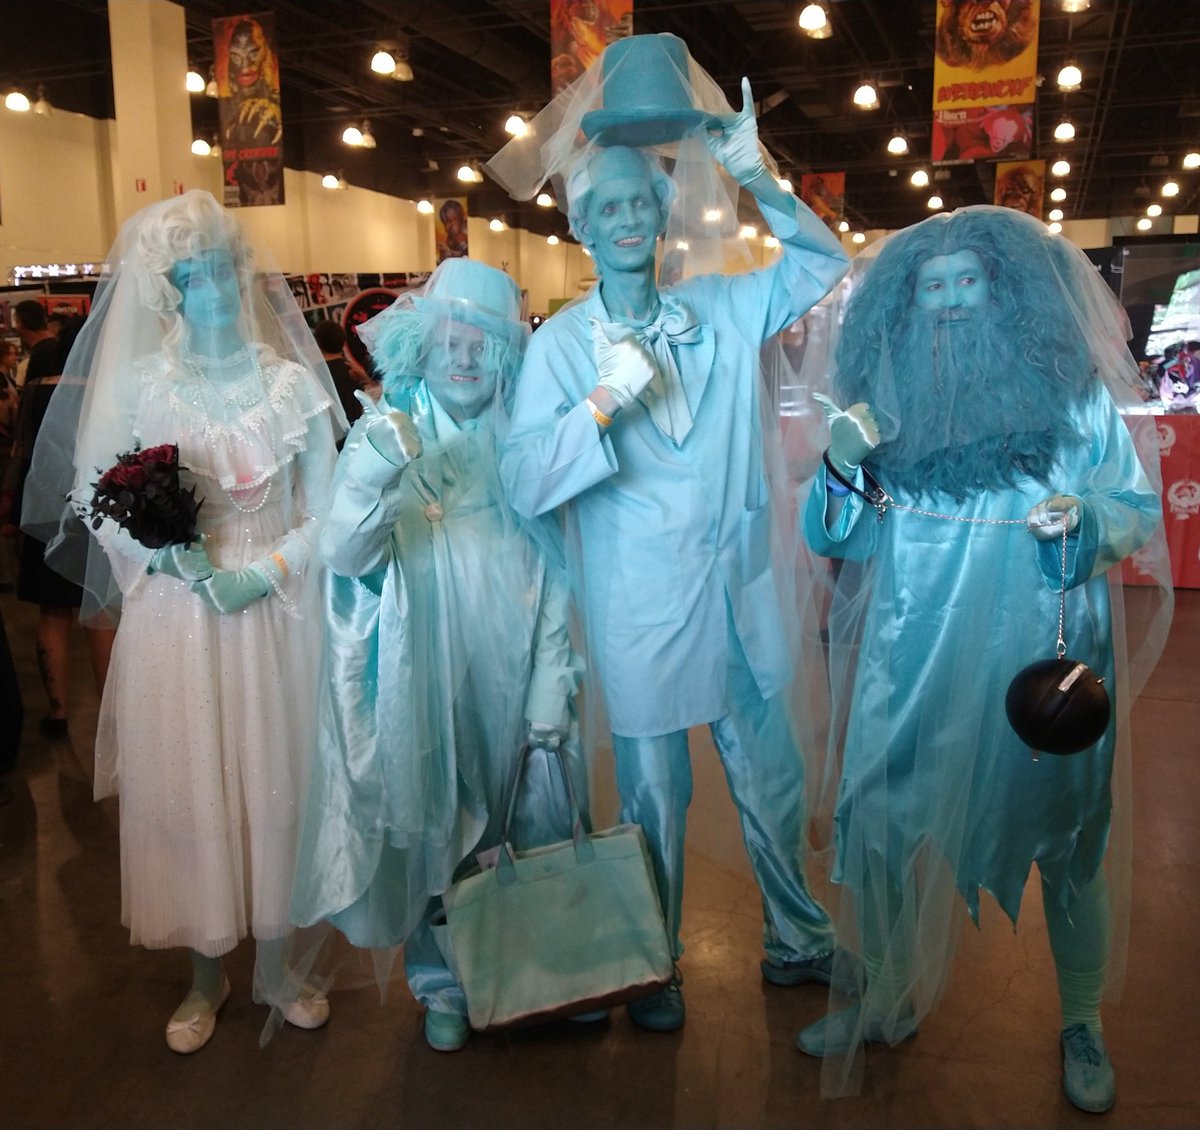 HITCHHIKING GHOSTS COME OUT TO SOCIALIZE